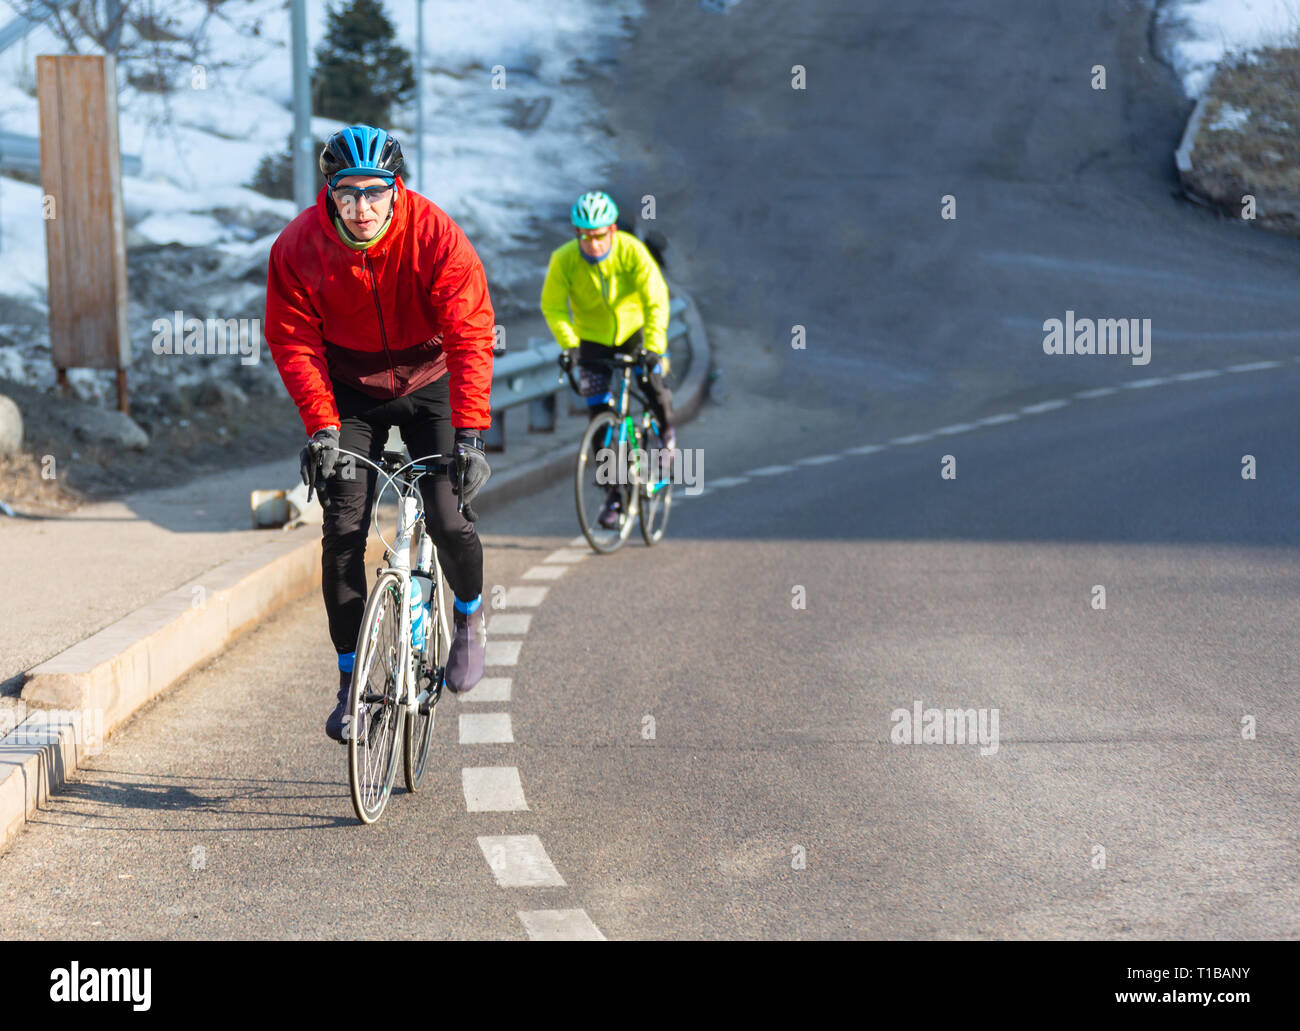 Professional road bicycle racer in action at dawn of the day Stock Photo